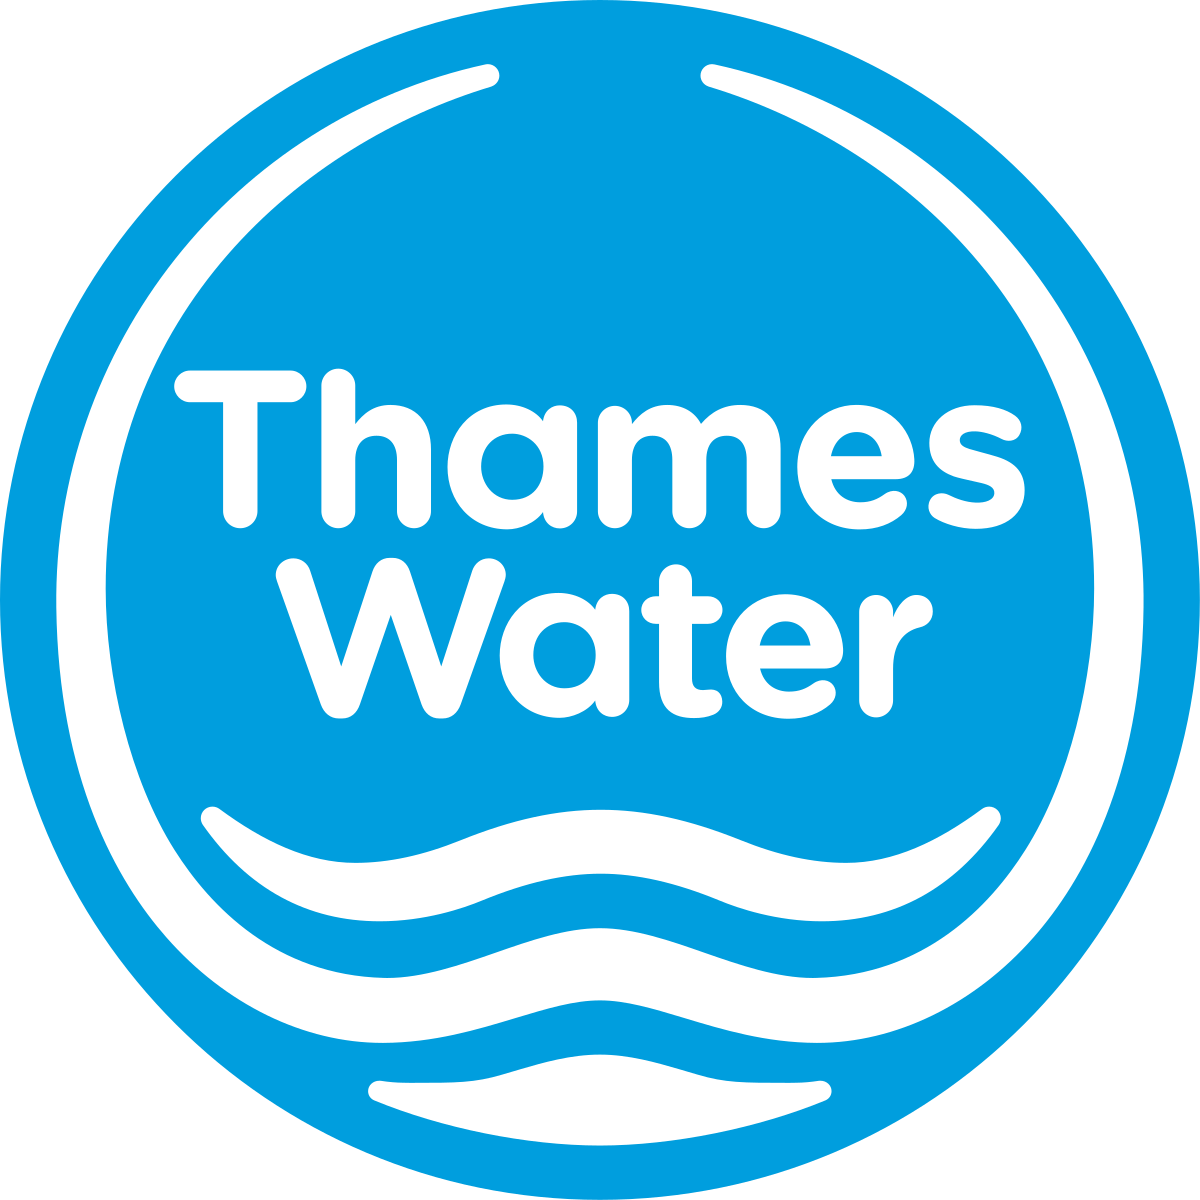 UK's Thames Water in crisis after shareholders refuse to pay up